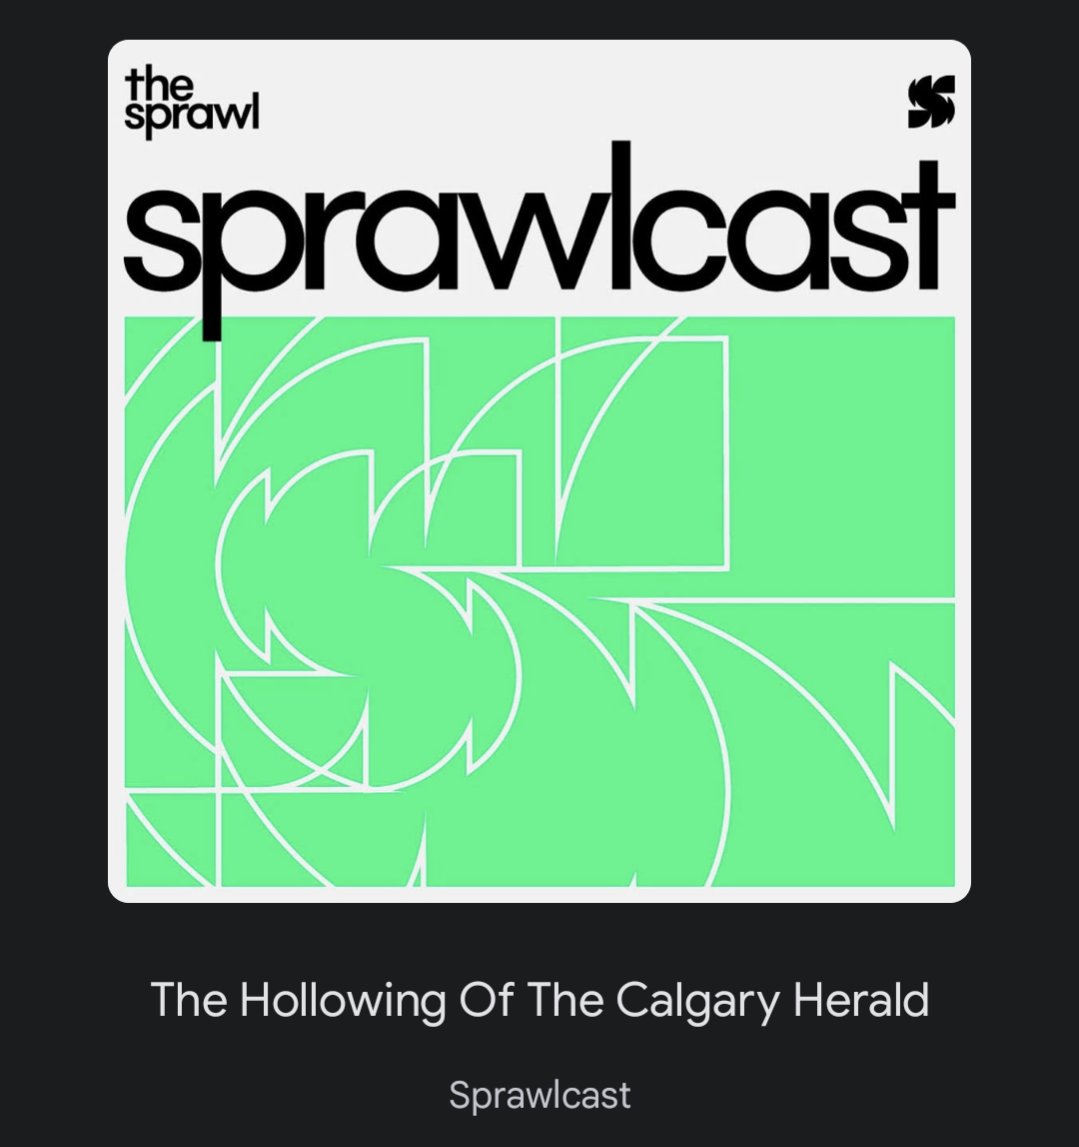 If you even have the tiniest interest in the media business? You have to listen to @sprawlcalgary's most recent Sprawlcast. @klaszus dives into the rise and fall of the Calgary Herald and even as an Edmonton kid; it is a FASCINATING look into AB print media. #yyc #yycmedia #yeg